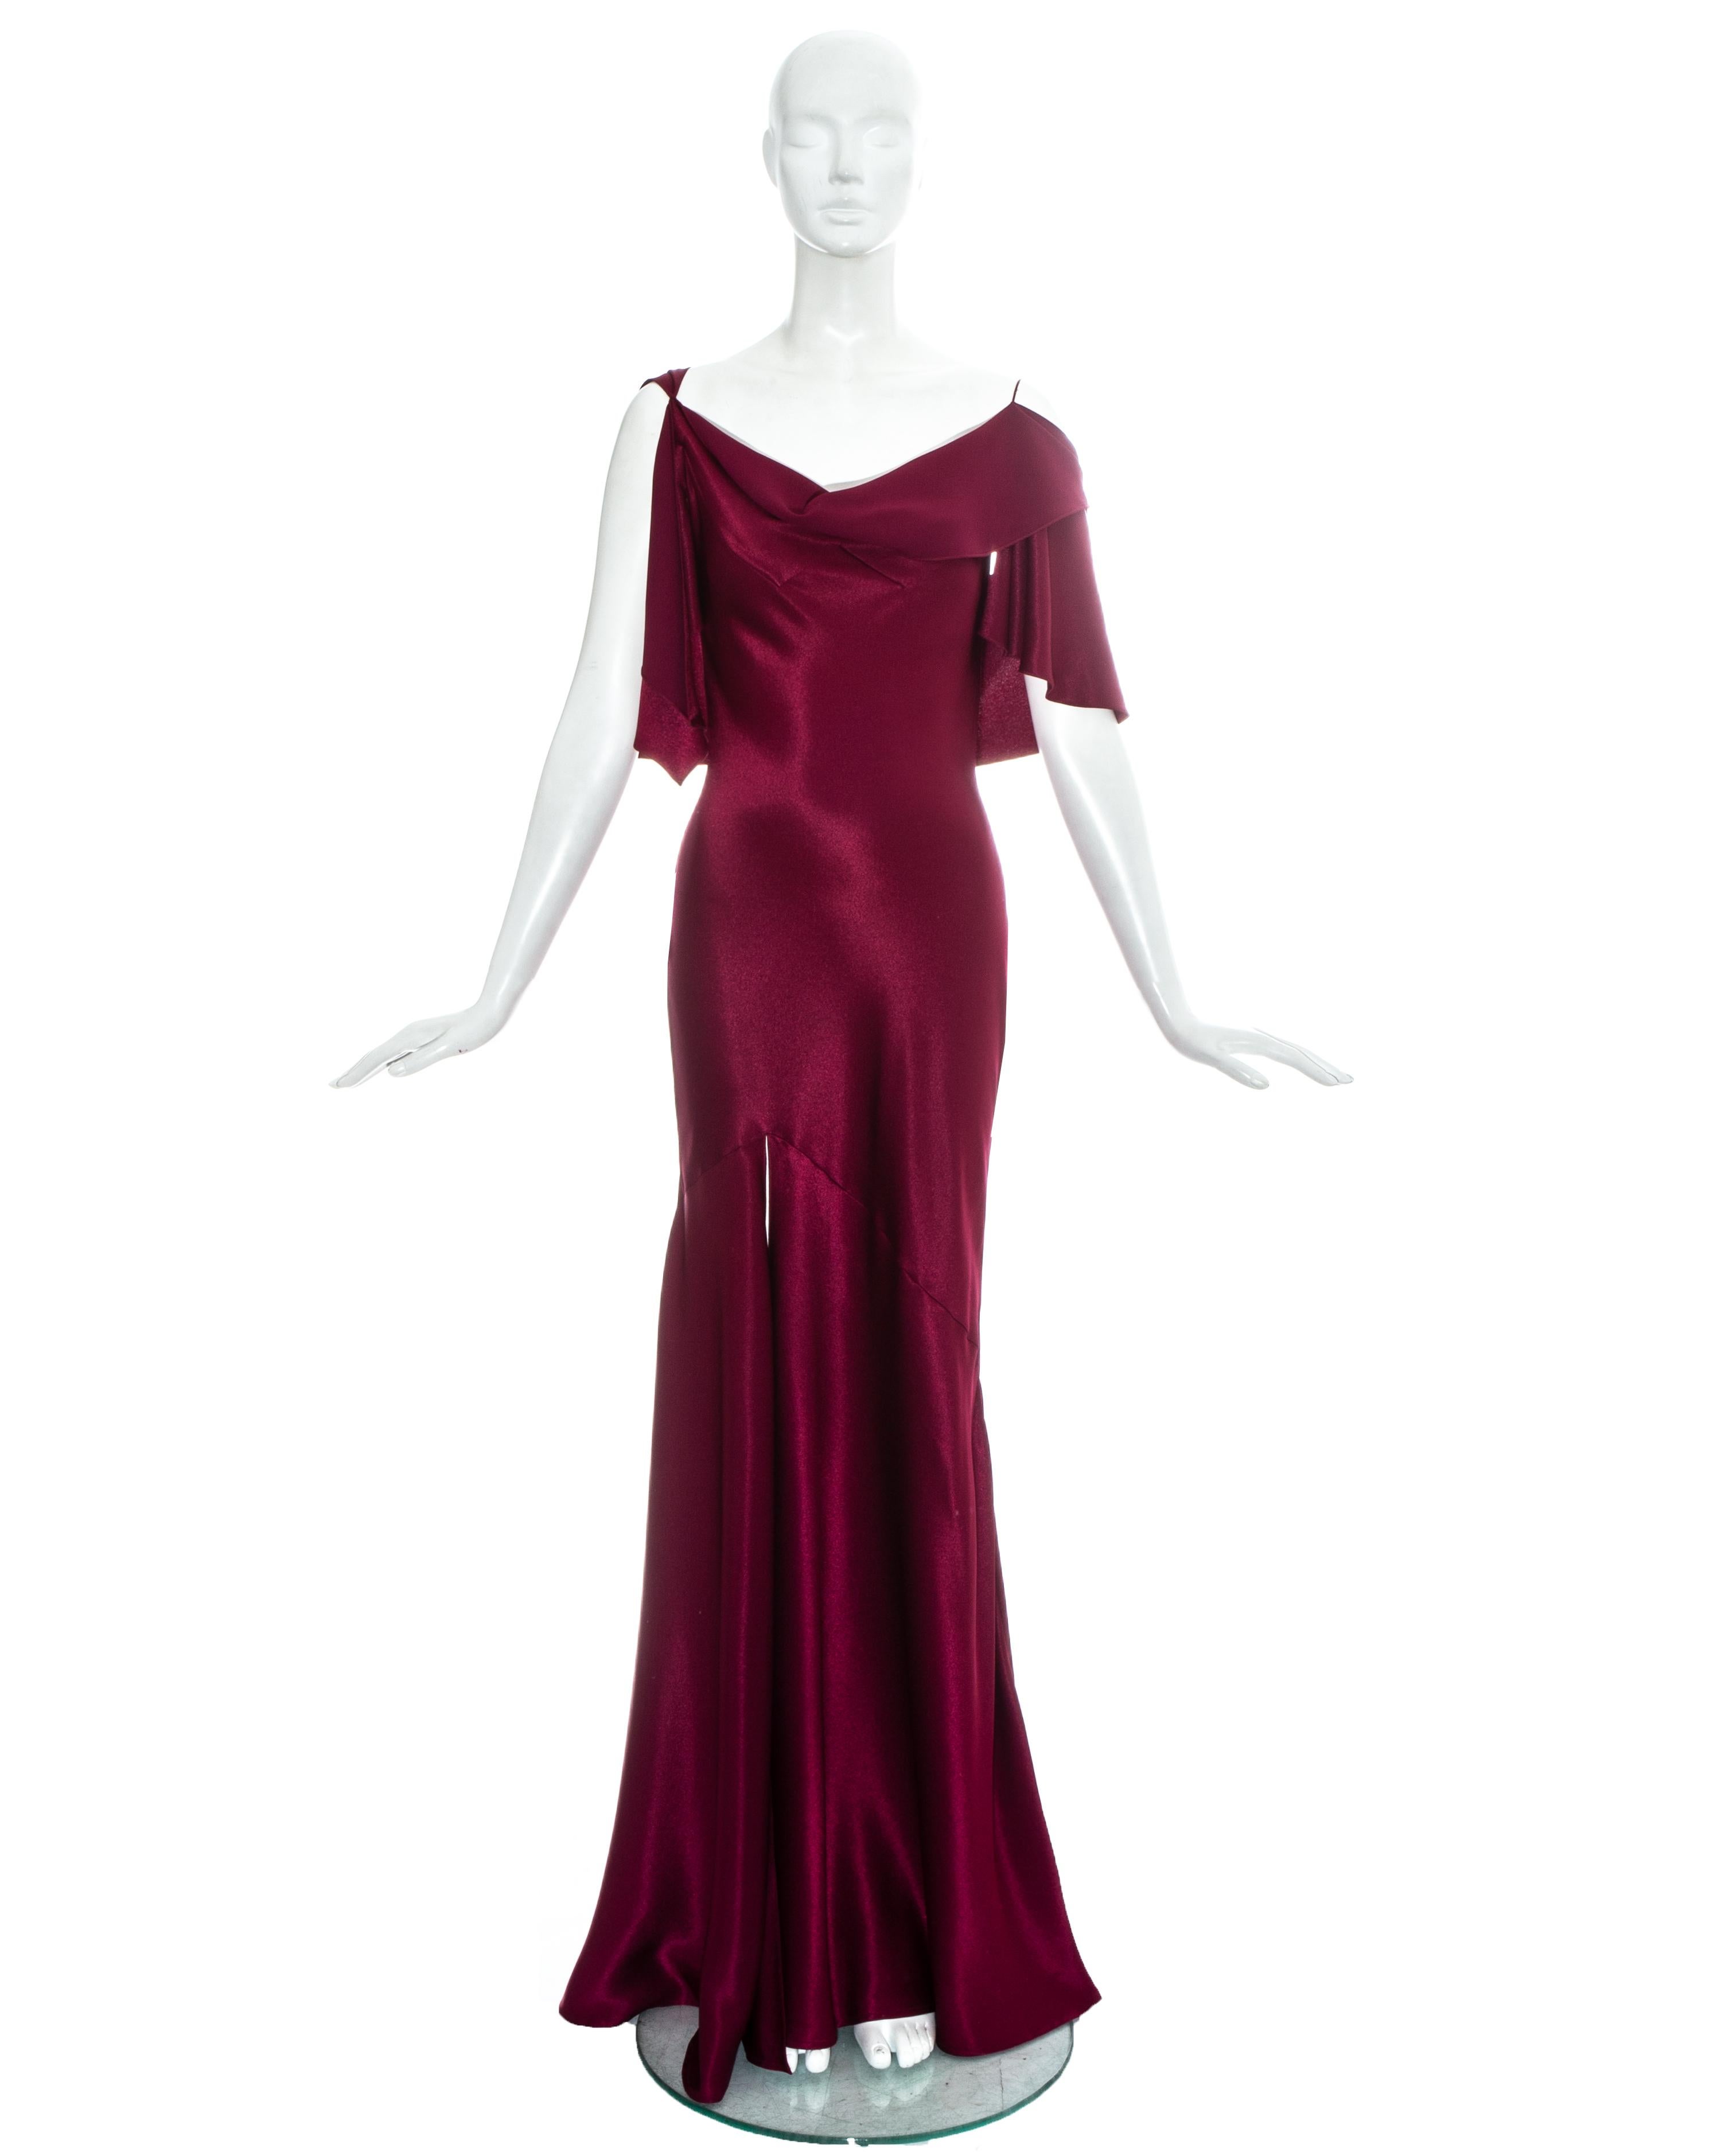 John Galliano wine red satin bias cut evening dress with attached caplet and high leg slit.

Fall-Winter 1999